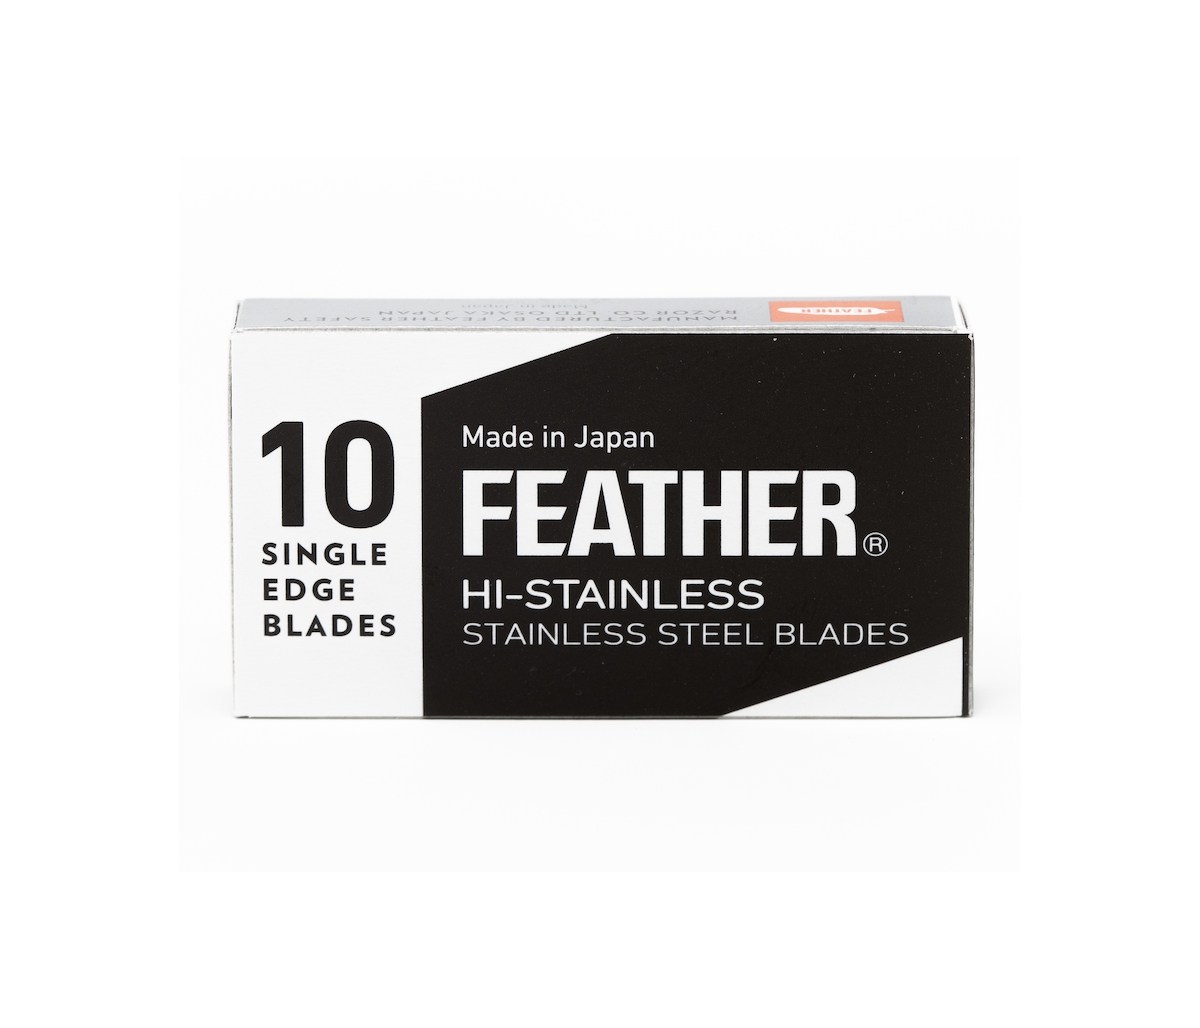 Feather Fhs Blades - Replacement Blades For One Blade Single Edge Razors